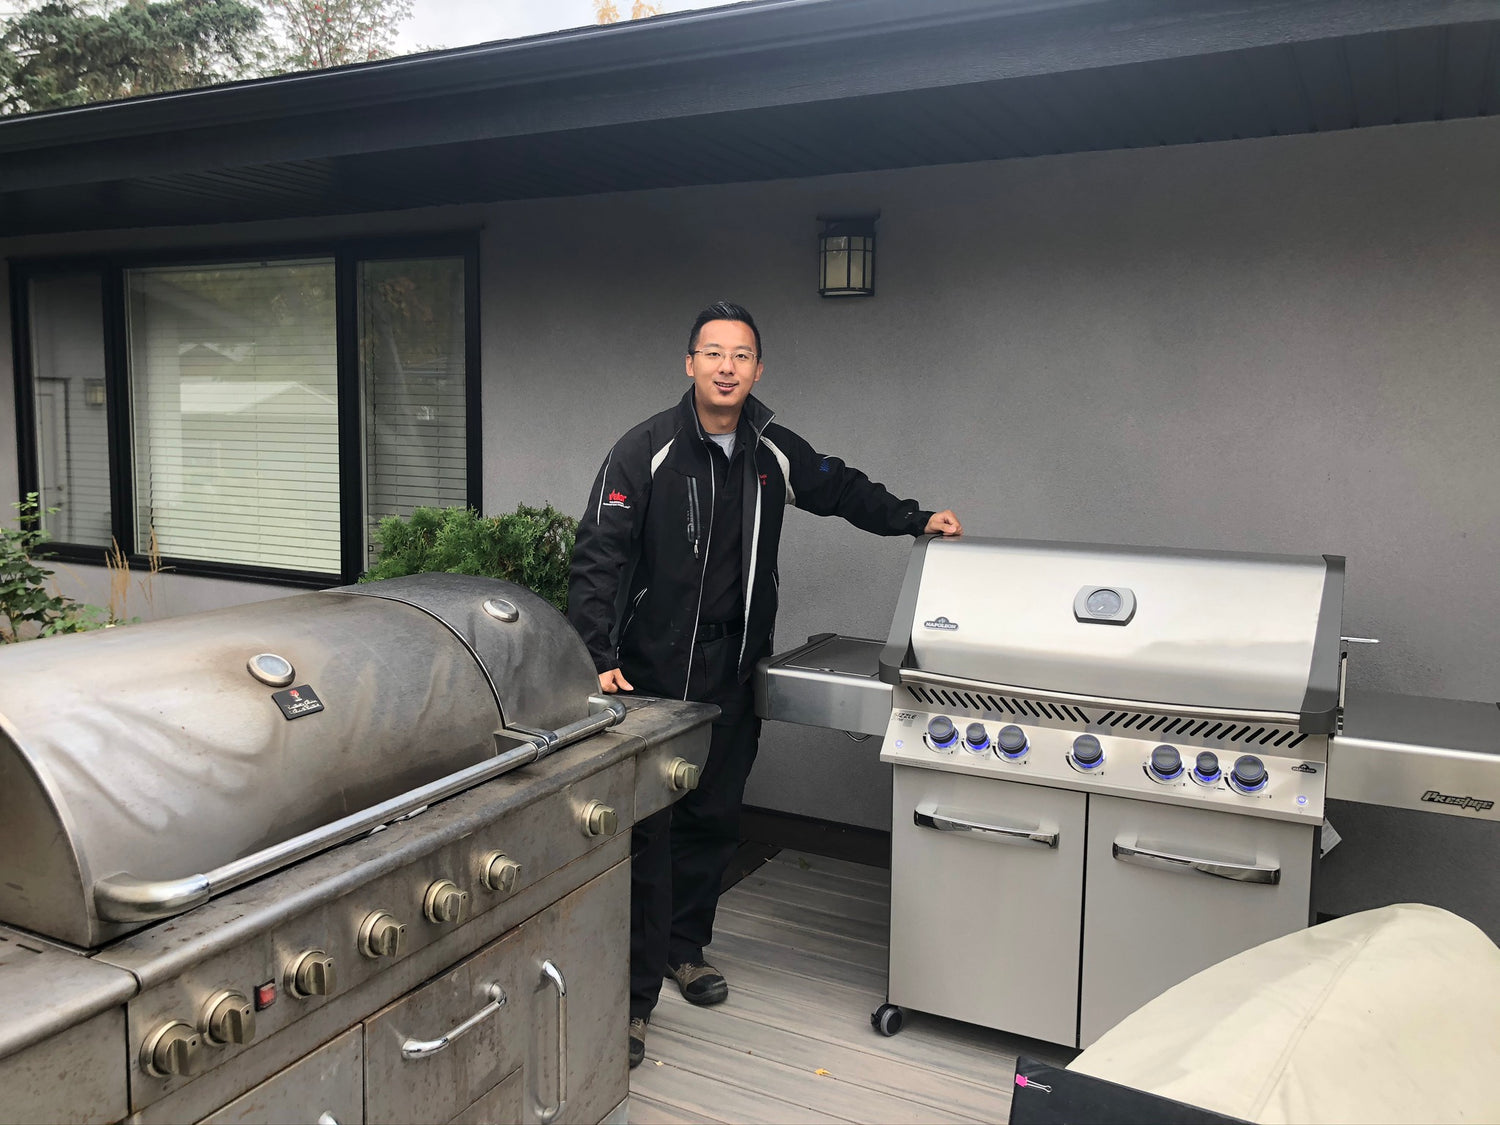 Napoleon Prestige P665RSIB - Natural Gas | The ultimate party bbq for all your summer grilling. Five main burners, SIZZLE ZONE infrared side burner and infrared rear rotisserie burner | Shop Barbecues Galore in Oakville, Burlington and Etobicoke, ON and in Calgary, AB